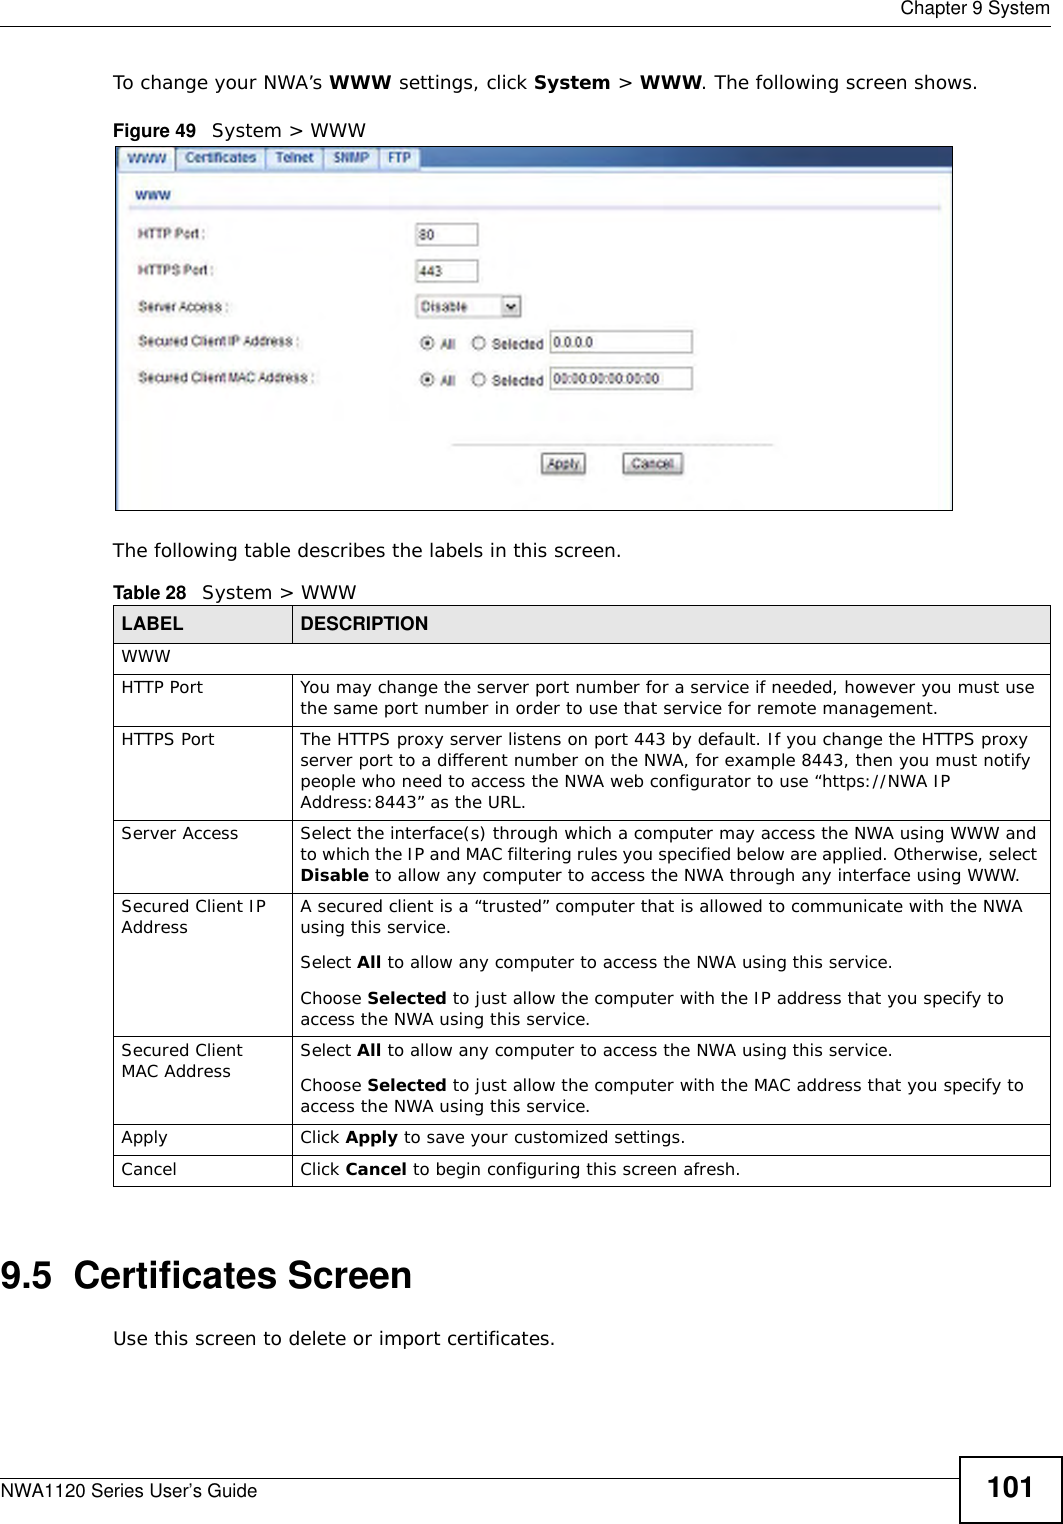  Chapter 9 SystemNWA1120 Series User’s Guide 101To change your NWA’s WWW settings, click System &gt; WWW. The following screen shows.Figure 49   System &gt; WWWThe following table describes the labels in this screen.9.5  Certificates ScreenUse this screen to delete or import certificates.Table 28   System &gt; WWWLABEL DESCRIPTIONWWWHTTP Port You may change the server port number for a service if needed, however you must use the same port number in order to use that service for remote management.HTTPS Port The HTTPS proxy server listens on port 443 by default. If you change the HTTPS proxy server port to a different number on the NWA, for example 8443, then you must notify people who need to access the NWA web configurator to use “https://NWA IP Address:8443” as the URL.Server Access Select the interface(s) through which a computer may access the NWA using WWW and to which the IP and MAC filtering rules you specified below are applied. Otherwise, select Disable to allow any computer to access the NWA through any interface using WWW.Secured Client IP Address A secured client is a “trusted” computer that is allowed to communicate with the NWA using this service. Select All to allow any computer to access the NWA using this service.Choose Selected to just allow the computer with the IP address that you specify to access the NWA using this service.Secured Client MAC Address Select All to allow any computer to access the NWA using this service.Choose Selected to just allow the computer with the MAC address that you specify to access the NWA using this service.Apply Click Apply to save your customized settings. Cancel Click Cancel to begin configuring this screen afresh.